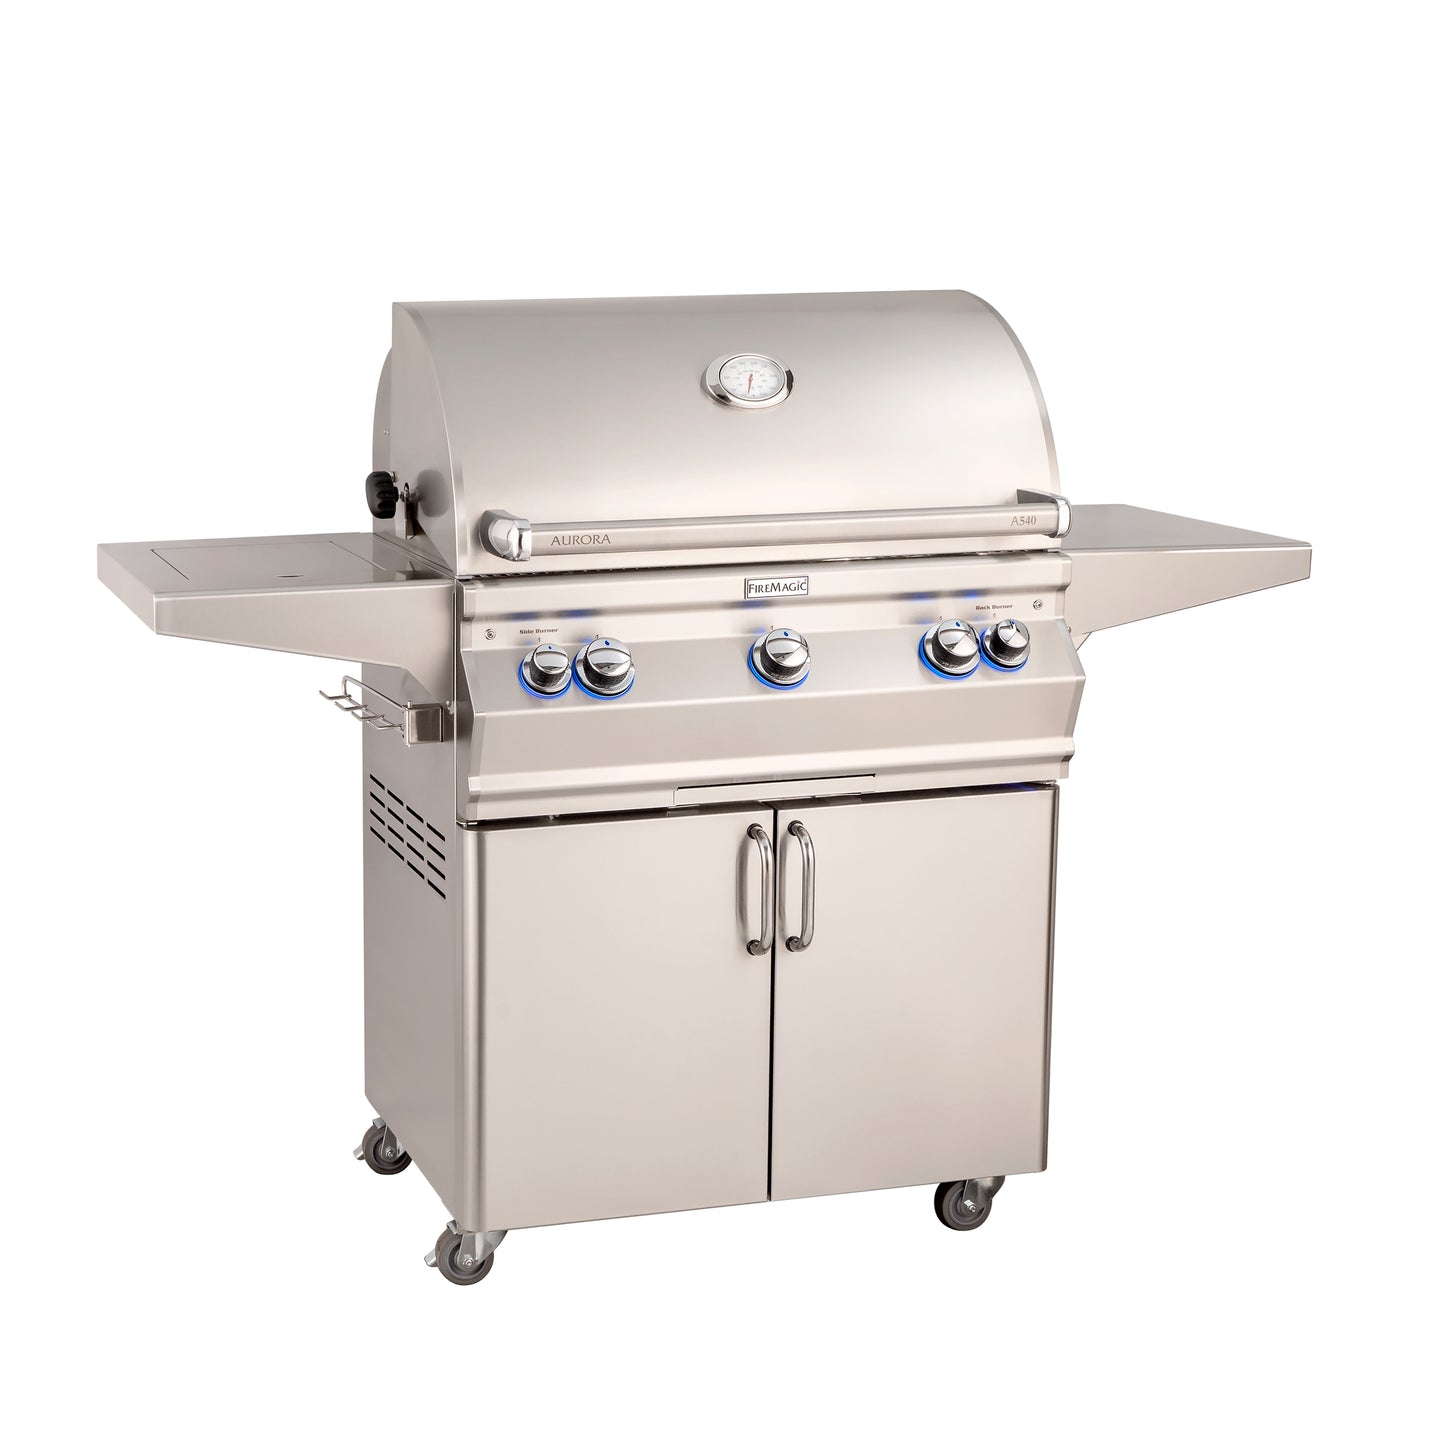 FireMagic | Aurora A540s 30" Portable Grills with Analog Thermometer & Single Side Burner